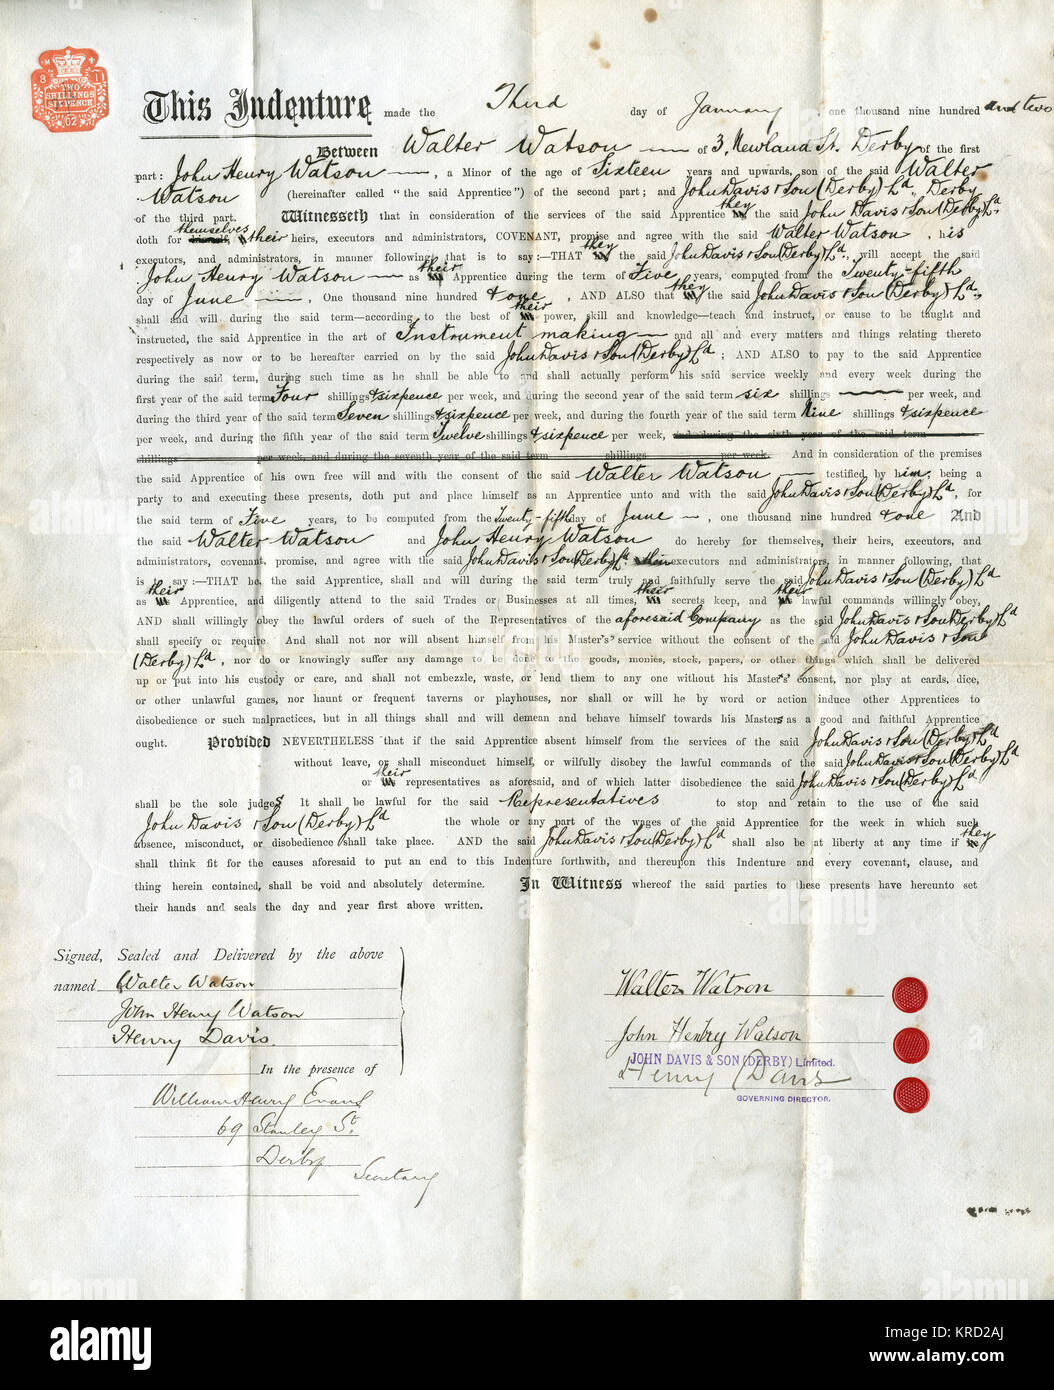 Official wording of an Apprenticeship Indenture, between John Henry Watson of 3 Newland Street, Derby, and Messrs John Davis &amp; Son (Derby) Limited.  The document is signed by John Henry Watson himself (then about 17 years old), his father Walter Watson, and Henry Davis, Governing Director.  The apprenticeship is for five years, dating from 25 June 1901, in the skill of instrument making.  The apprentice's pay is agreed at 4 shillings and sixpence per week for the first year, rising to 6 shillings in the second year, 7/6 in the third, 9/6 in the fourth, and 12/6 in the fifth.  The apprentic Stock Photo